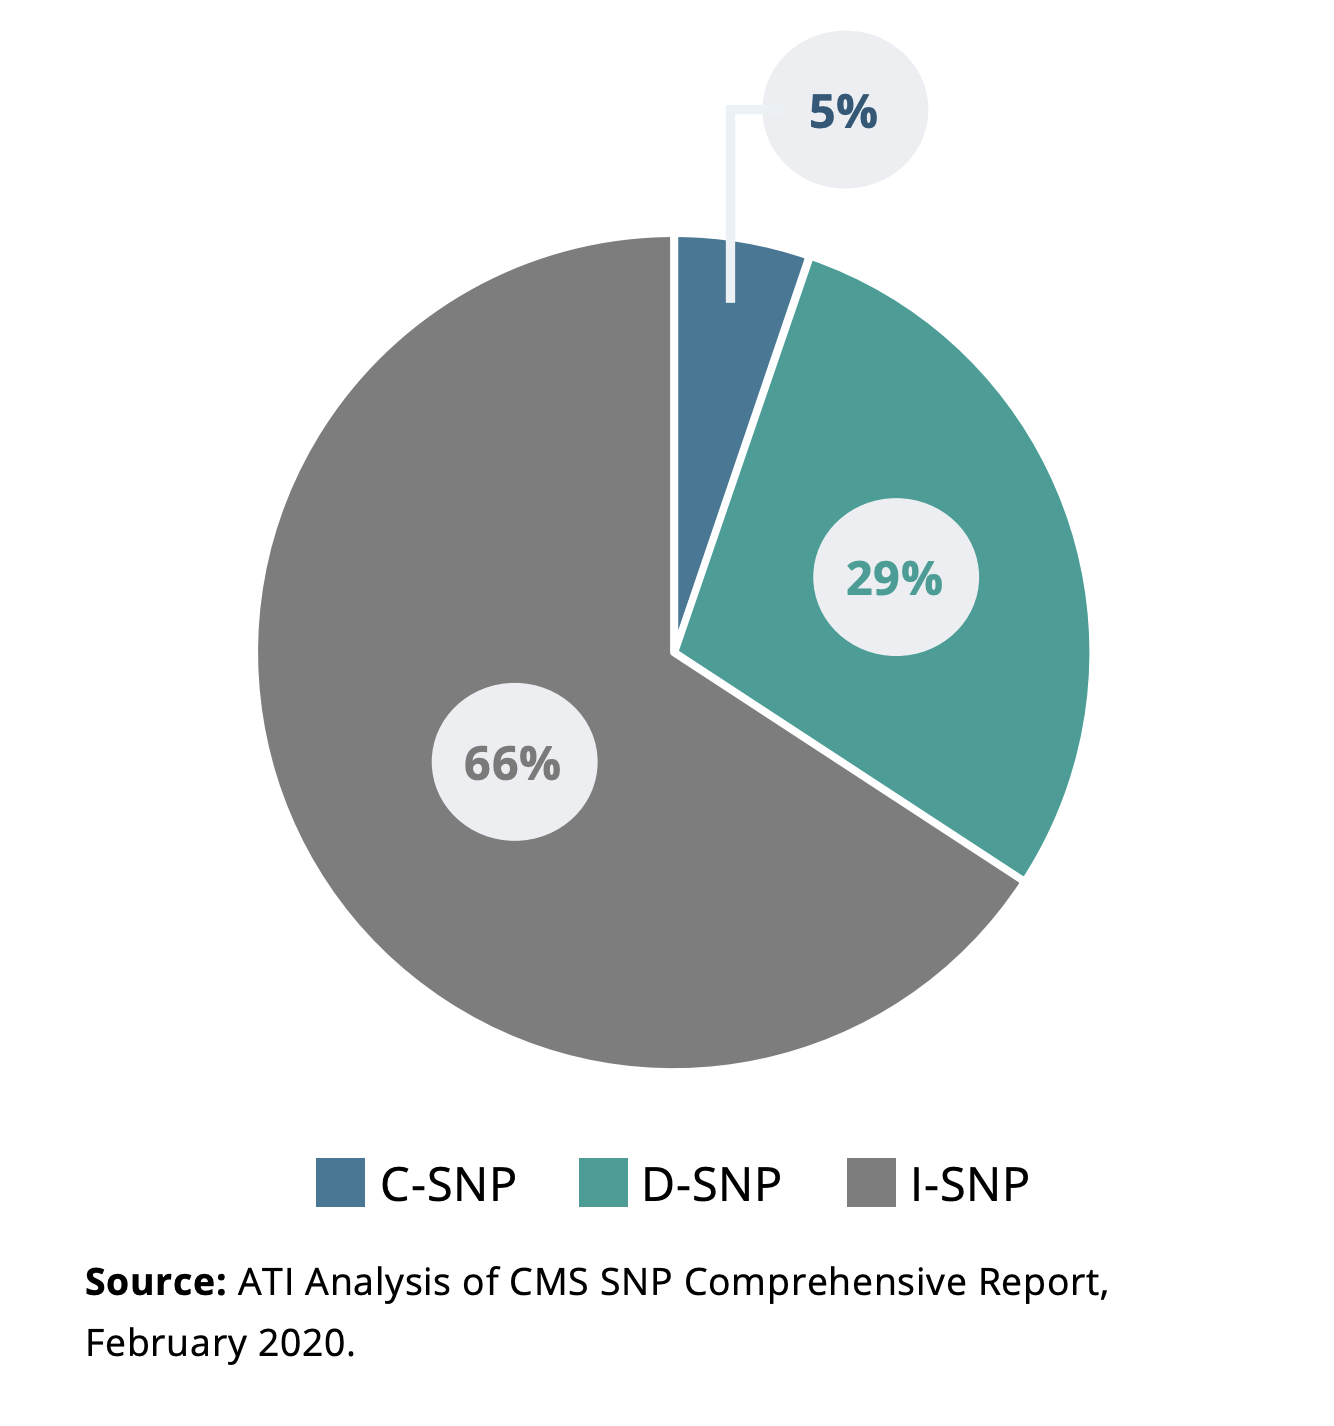 Graph showing the amount of SNPs were I-SNPS, D-SNPs, and C-SNPs